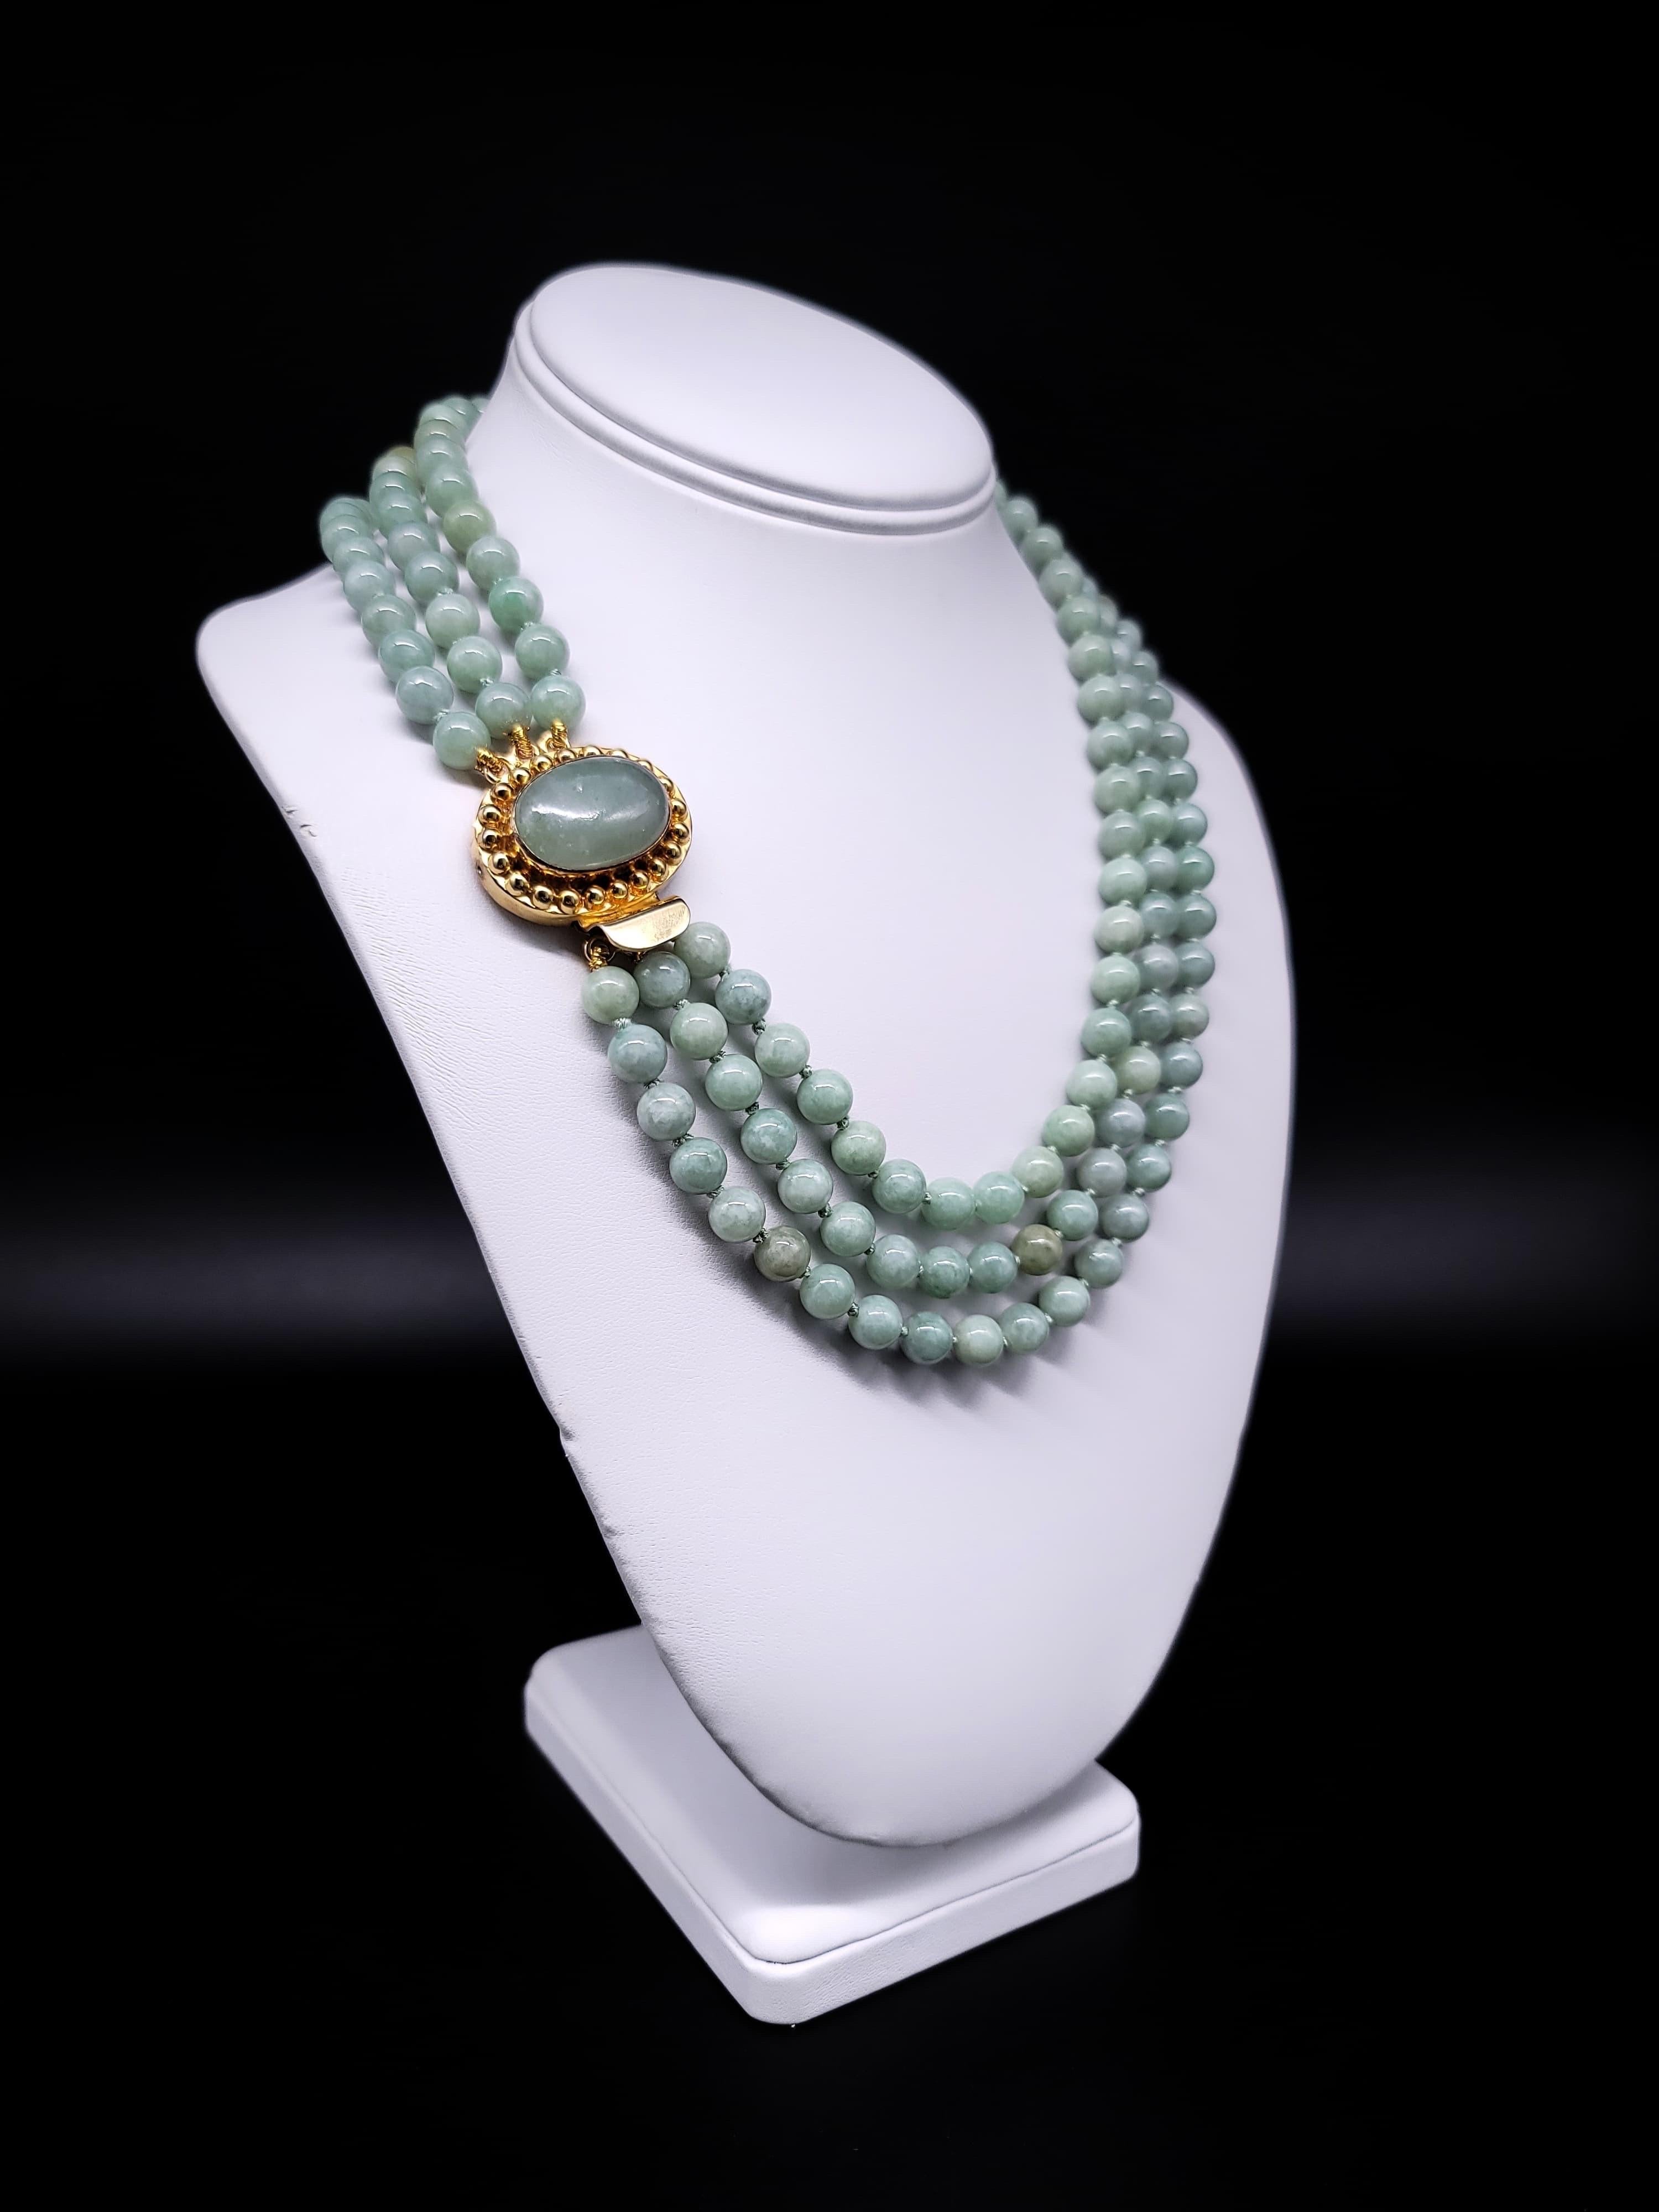 One-of-a-Kind

Introducing an exquisite Burma Jade necklace, crafted with utmost care and attention to detail. Jade has been a symbol of beauty, grace, and purity for over 5000 years, and this necklace pays homage to its timeless elegance. The